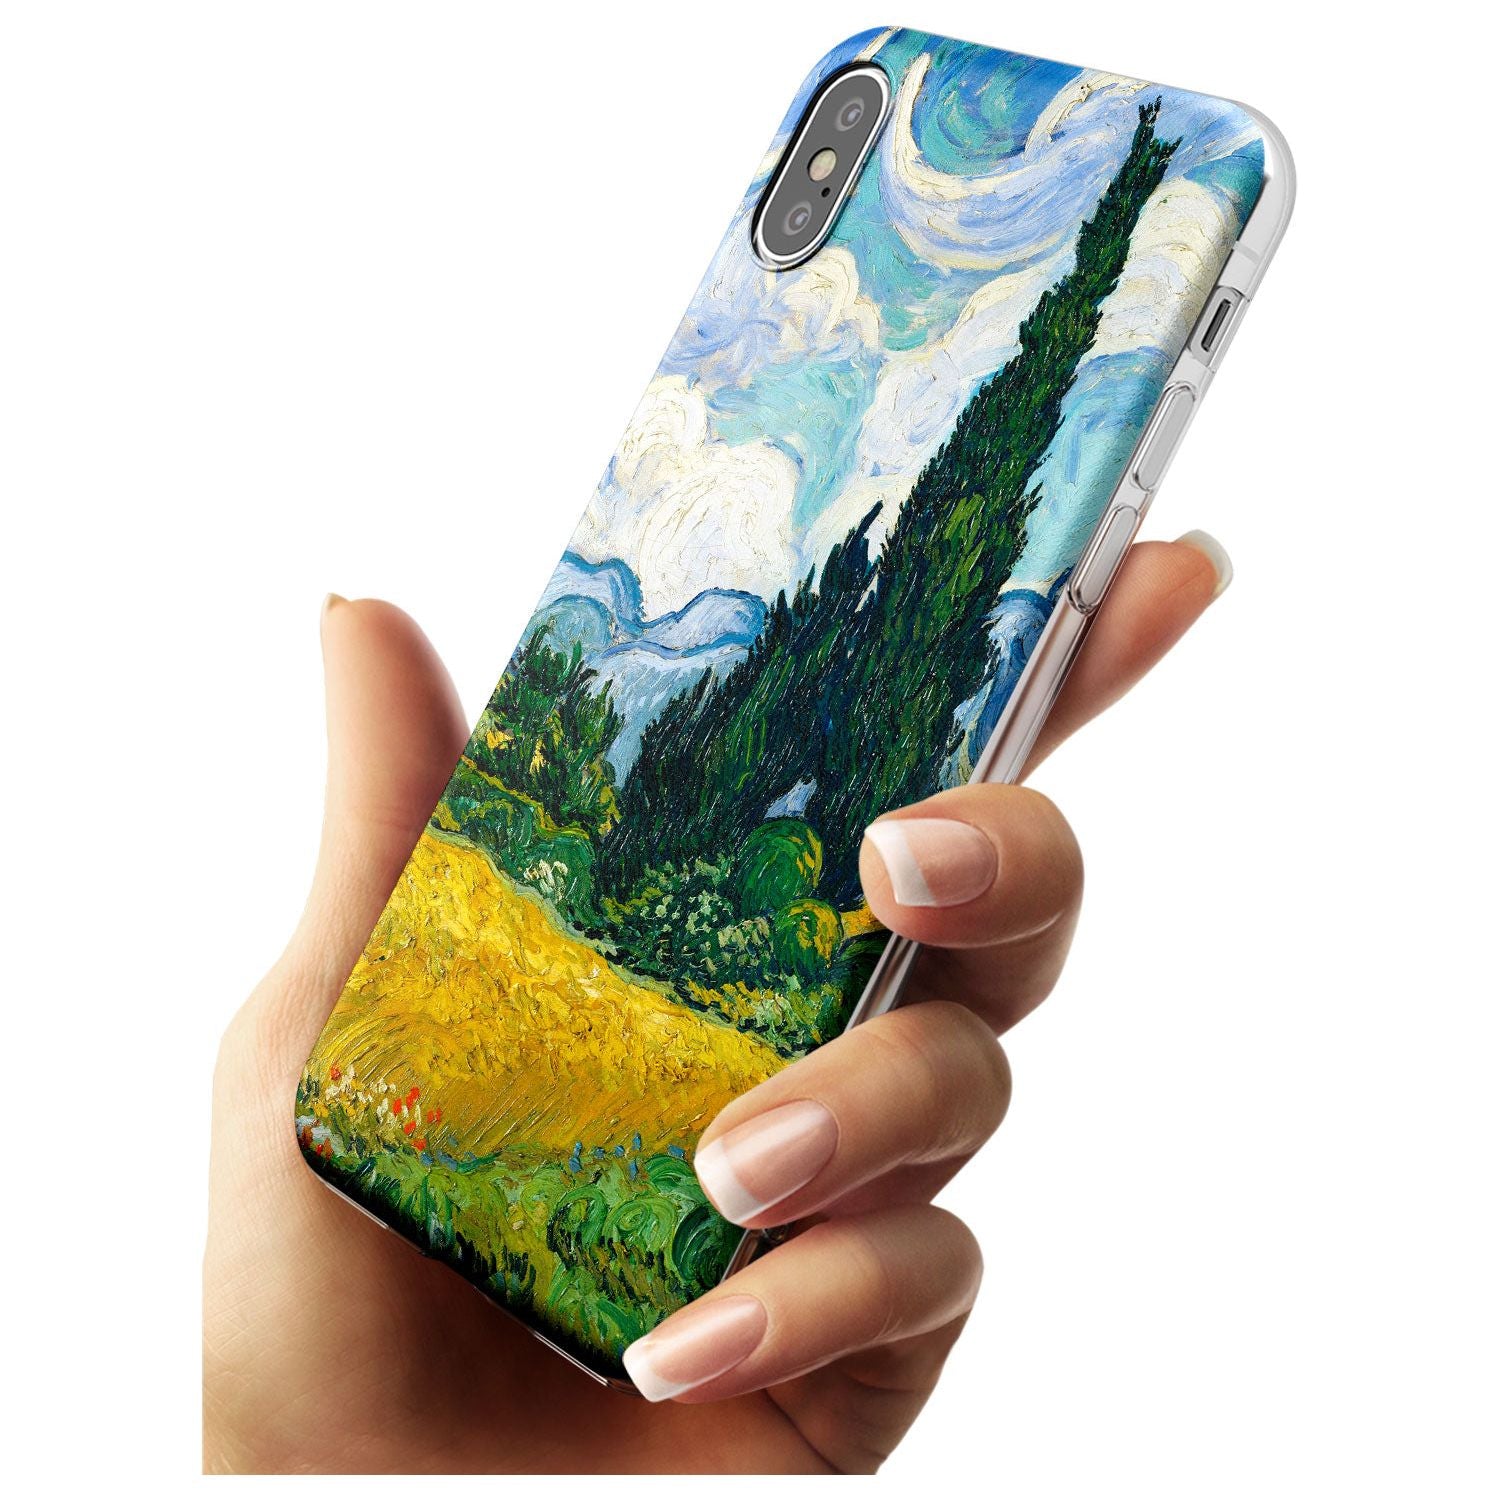 Wheat Field with Cypresses by Vincent Van Gogh Black Impact Phone Case for iPhone X XS Max XR